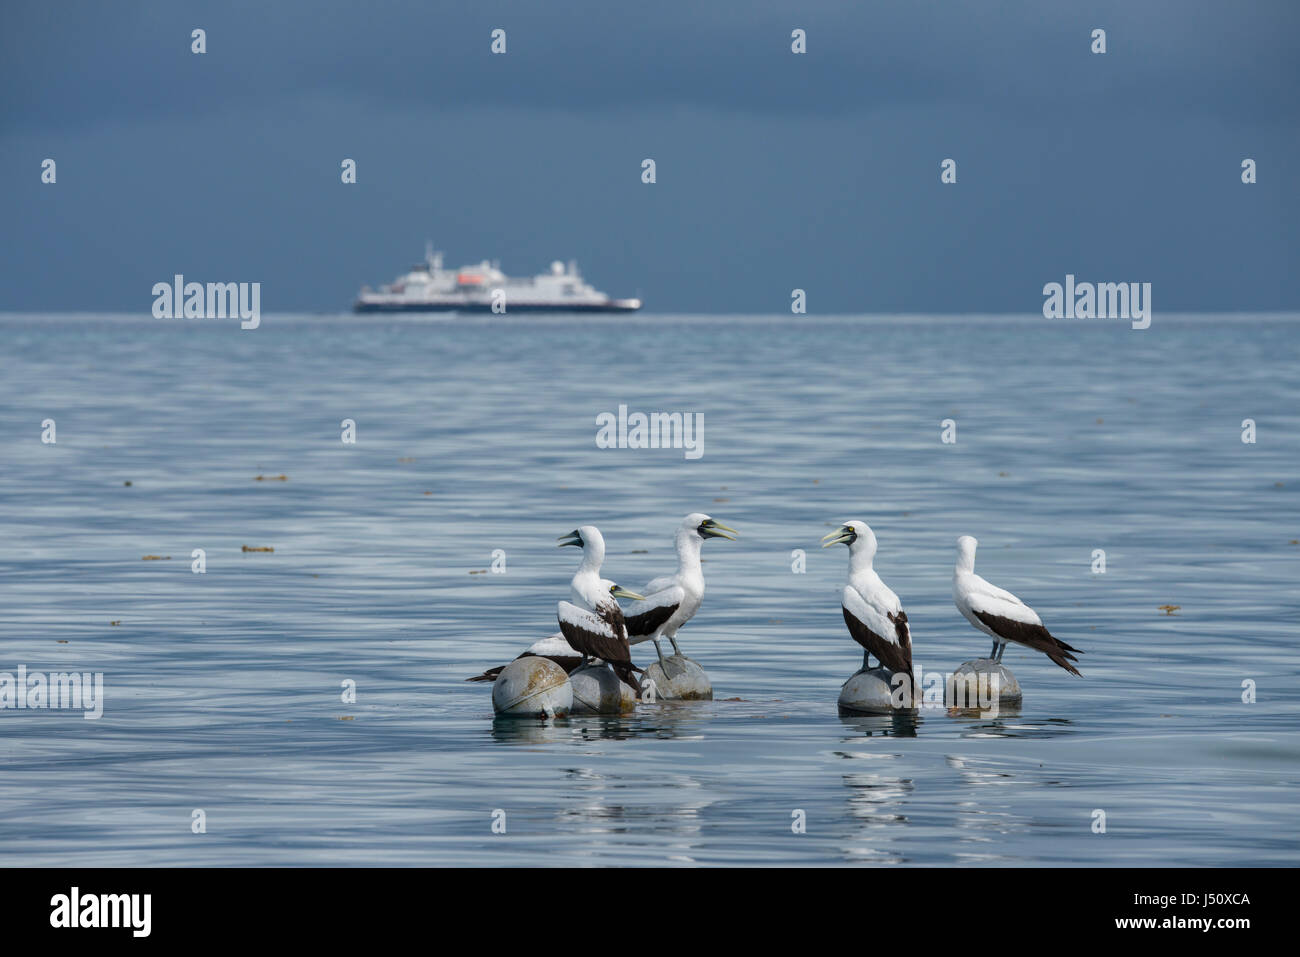 Seychelles, Indian Ocean, Aldabra Island Group, Cosmoledo Atoll. Home to the Seychelles' largest colonies of all three species of booby in the area. S Stock Photo